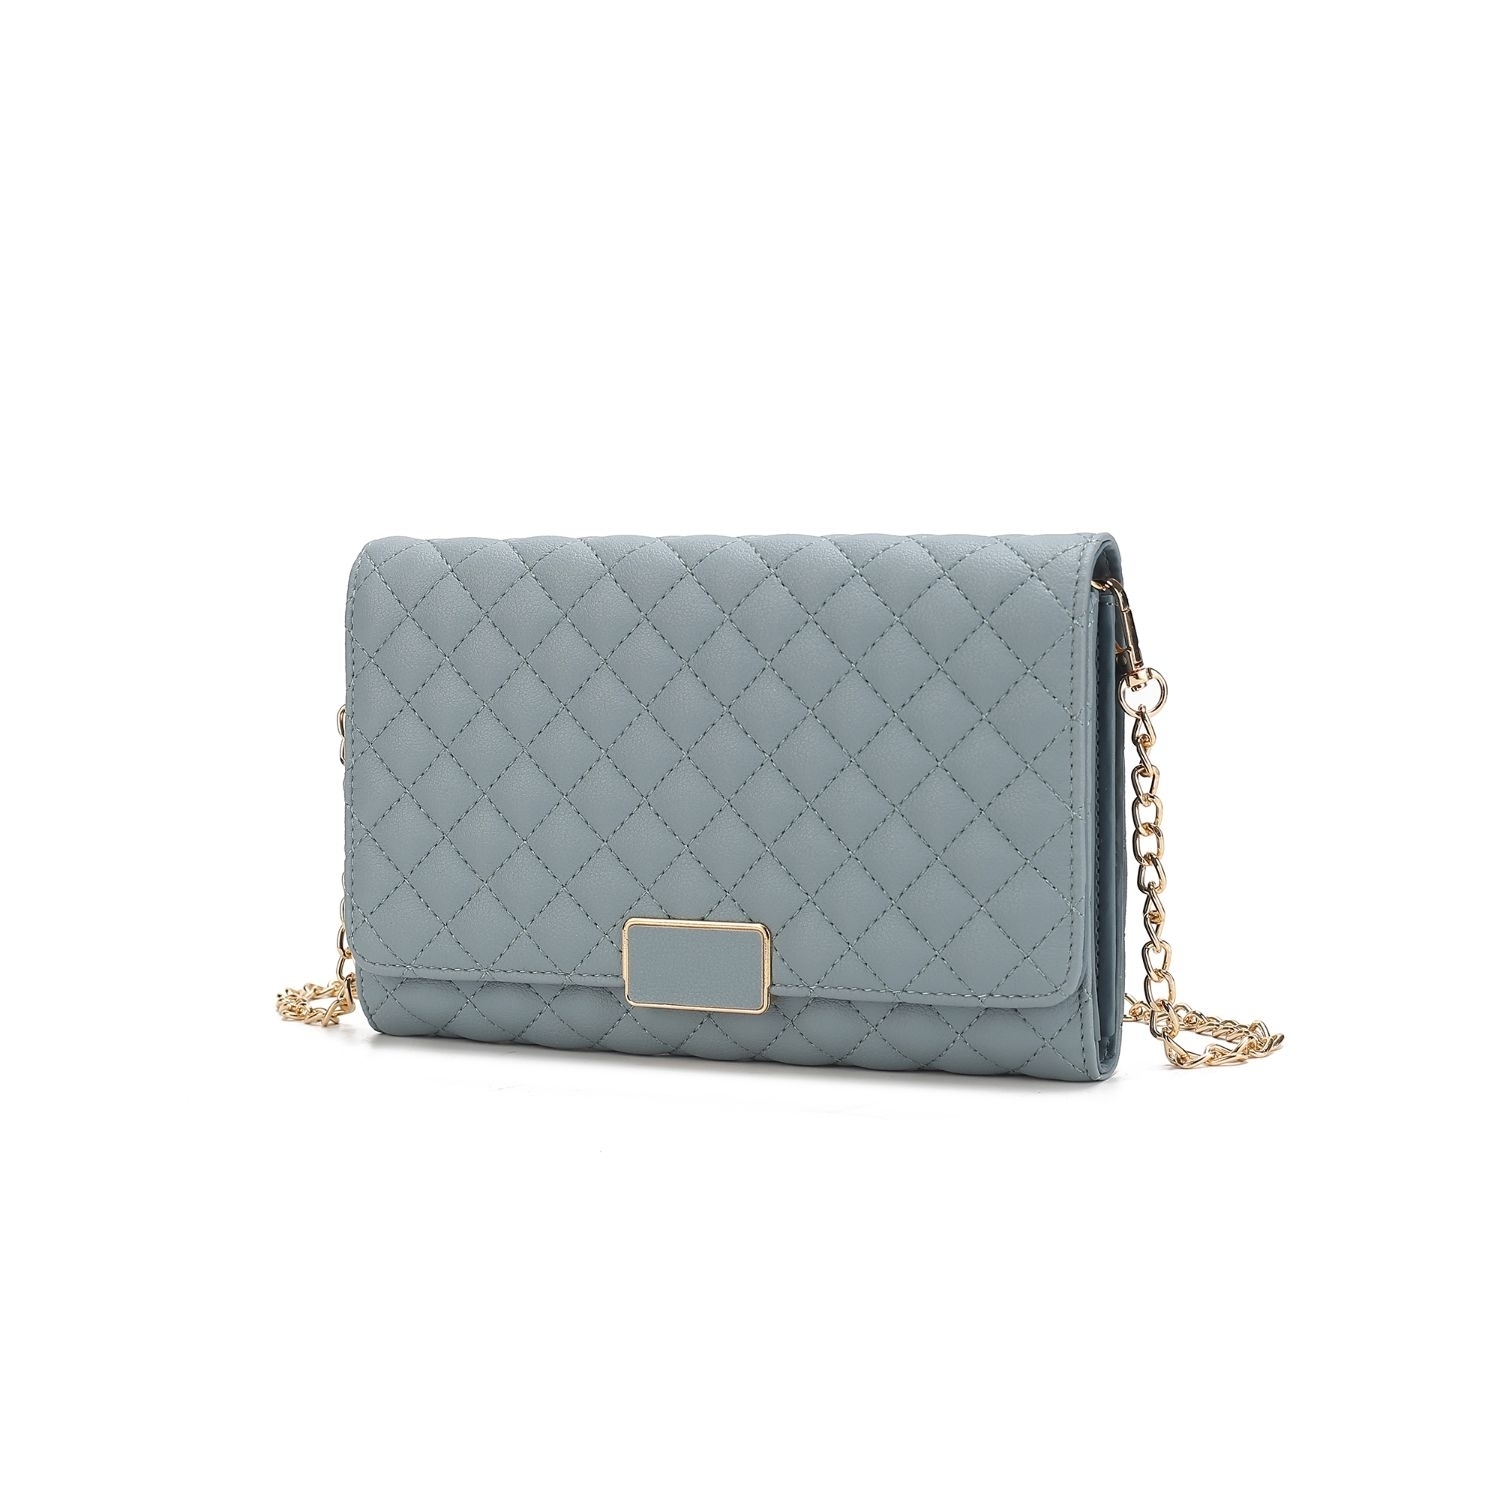 MKF Collection Gretchen Quilted Vegan Leather Women's Envelope Clutch Crossbody By Mia K - Light Blue